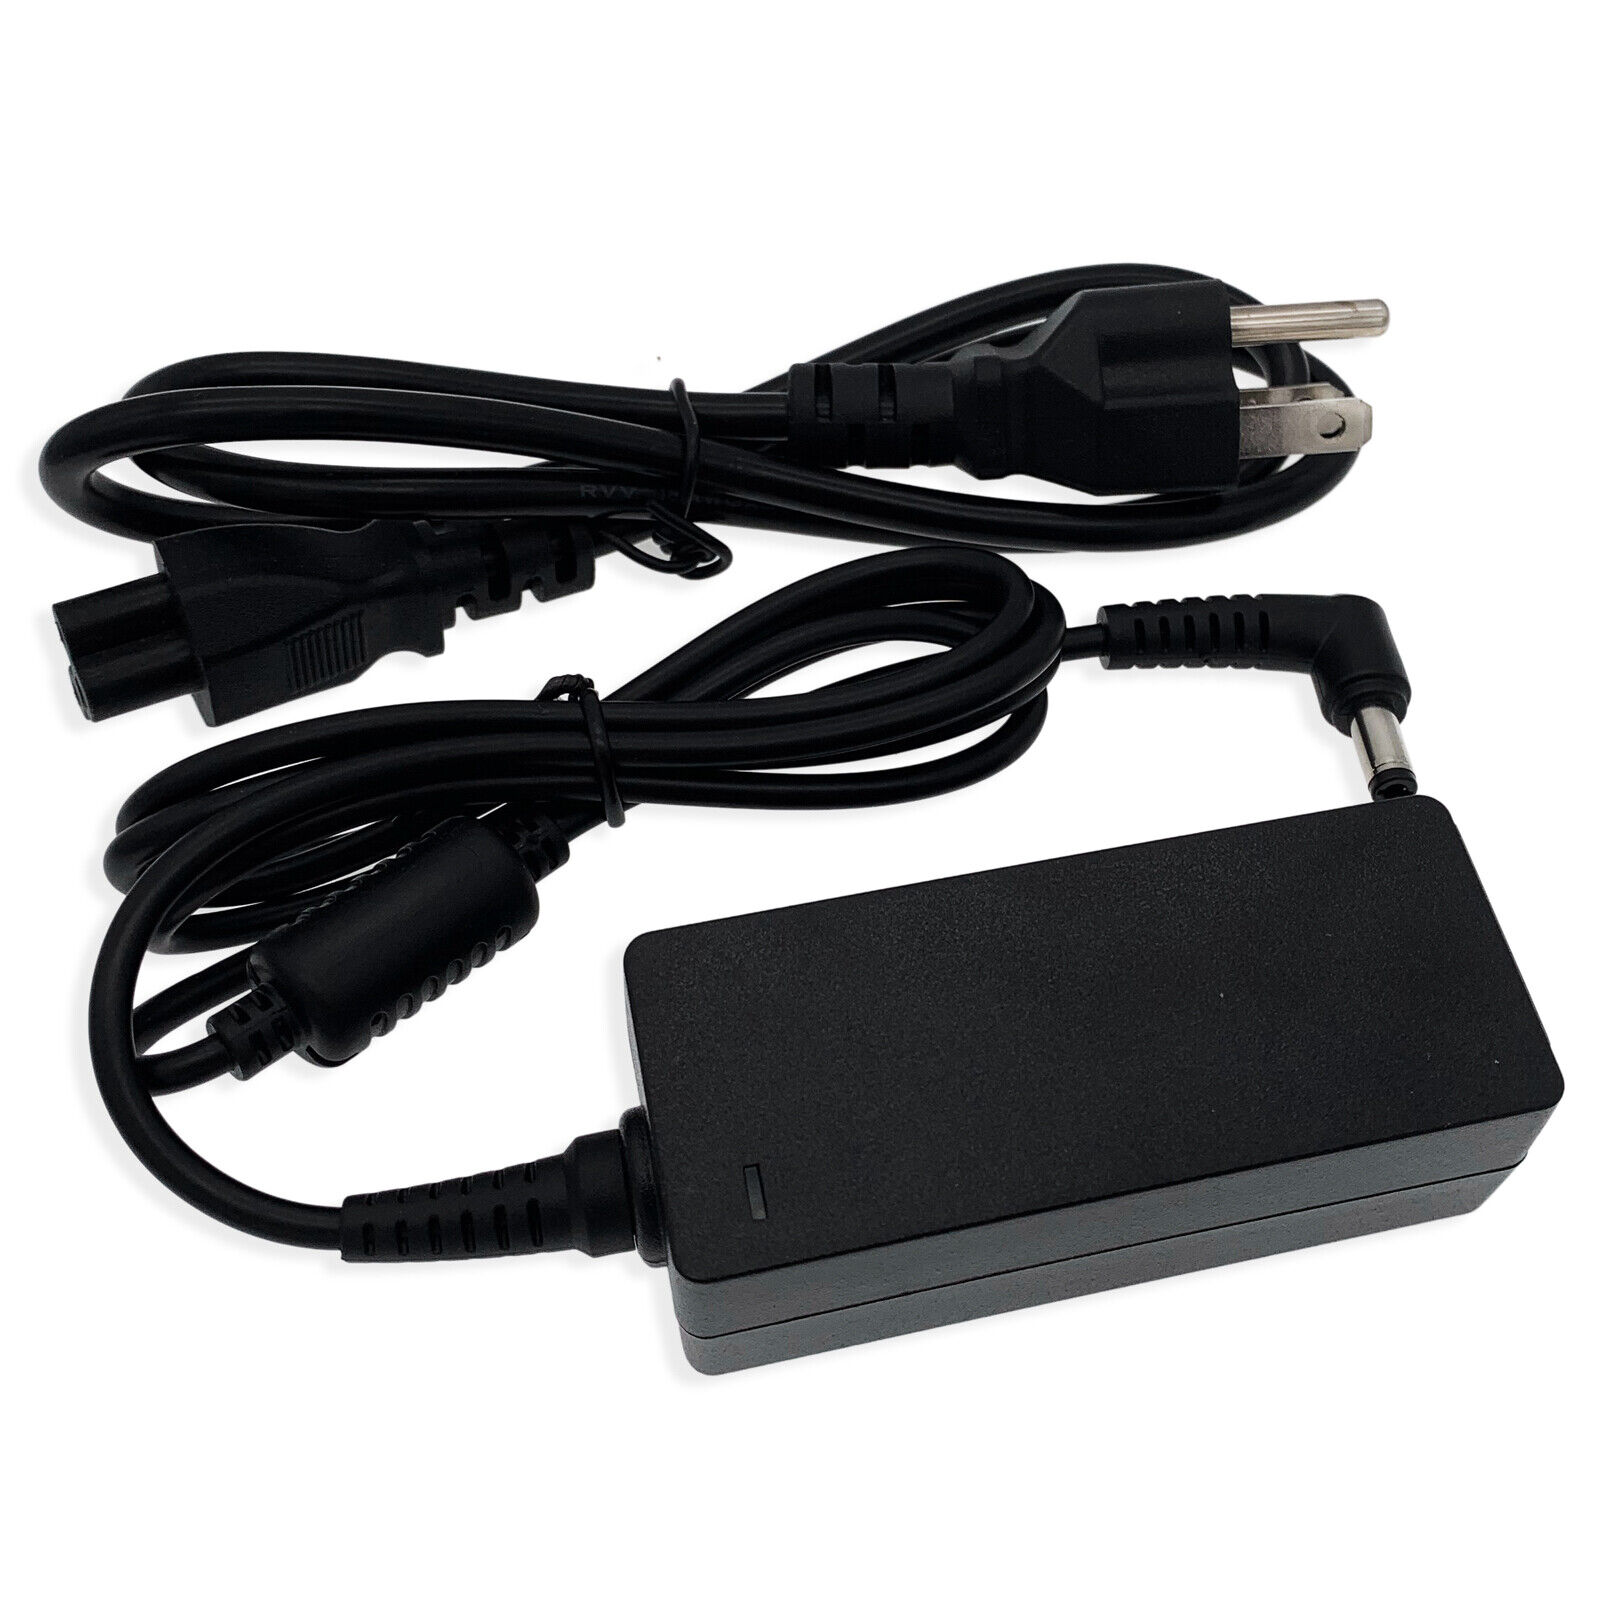 AC Power Adapter Compatible with Logitech 190542-0000 G25 G27 G29 G920 Racing Wheel, ADP-18LBB 190211-0010 190211-A030 E